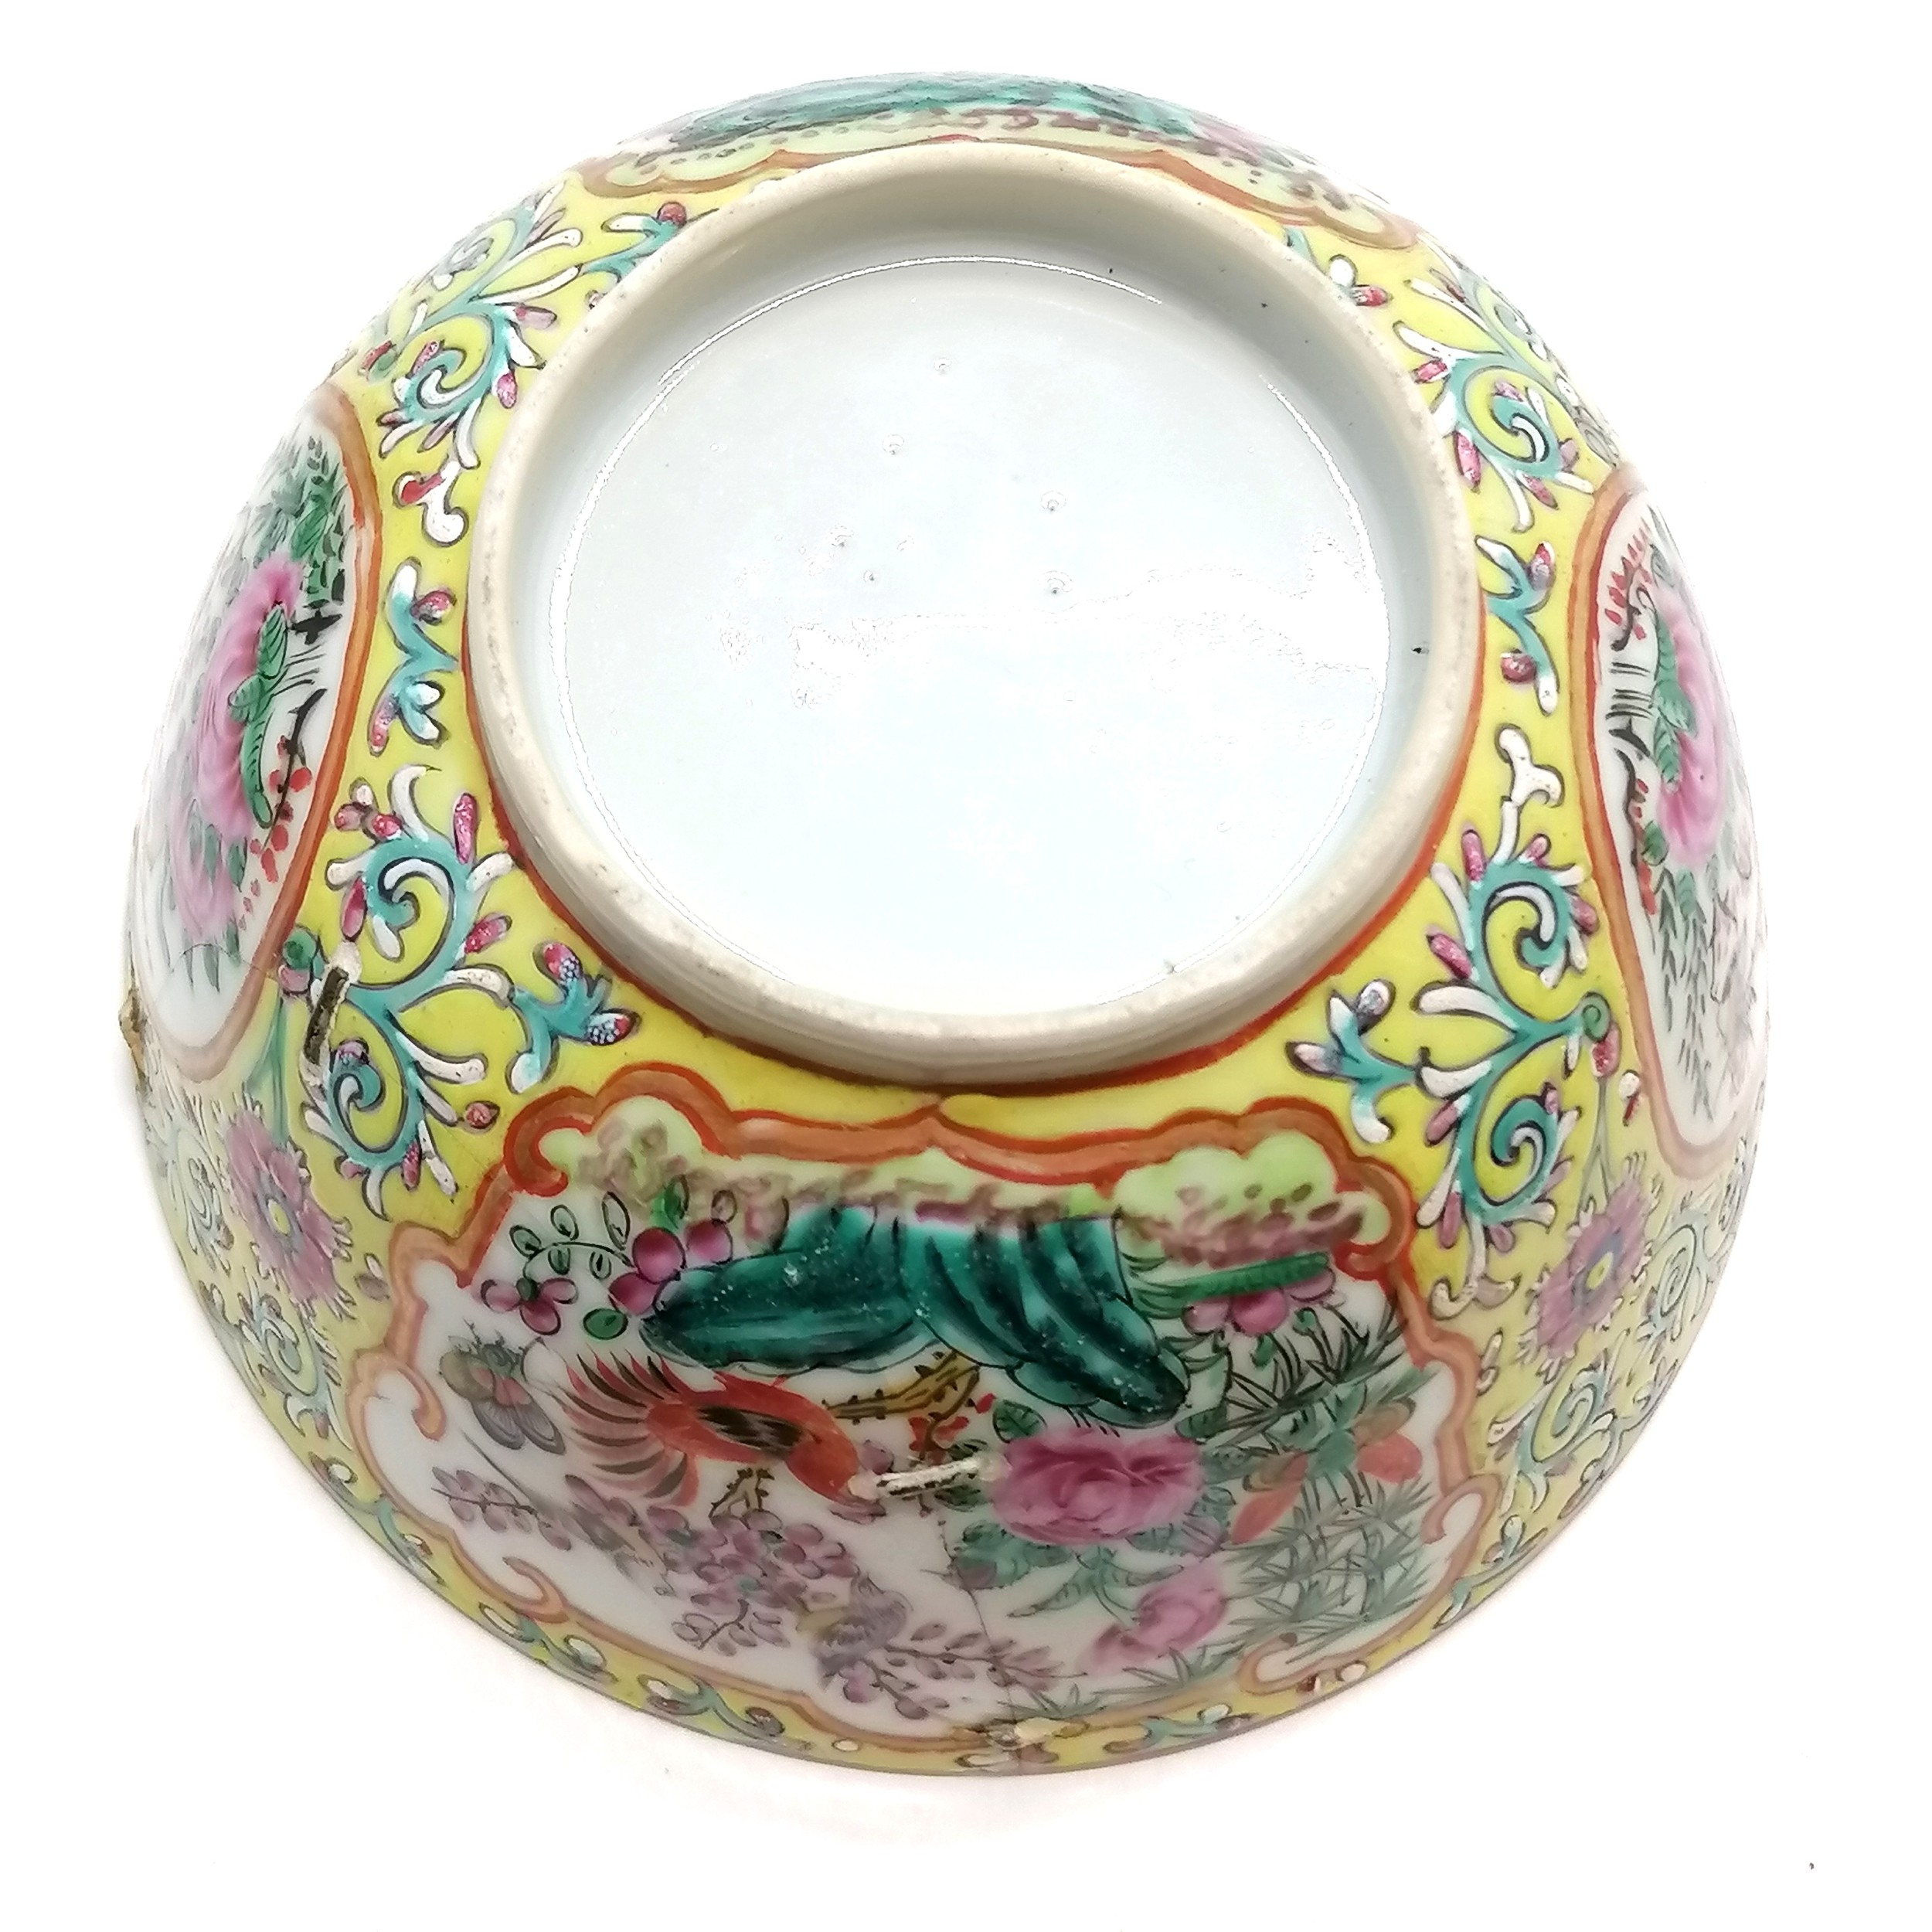 Antique Chinese famille rose bowl - yellow grounded with profuse floral & butterfly & bird (inc - Image 2 of 10